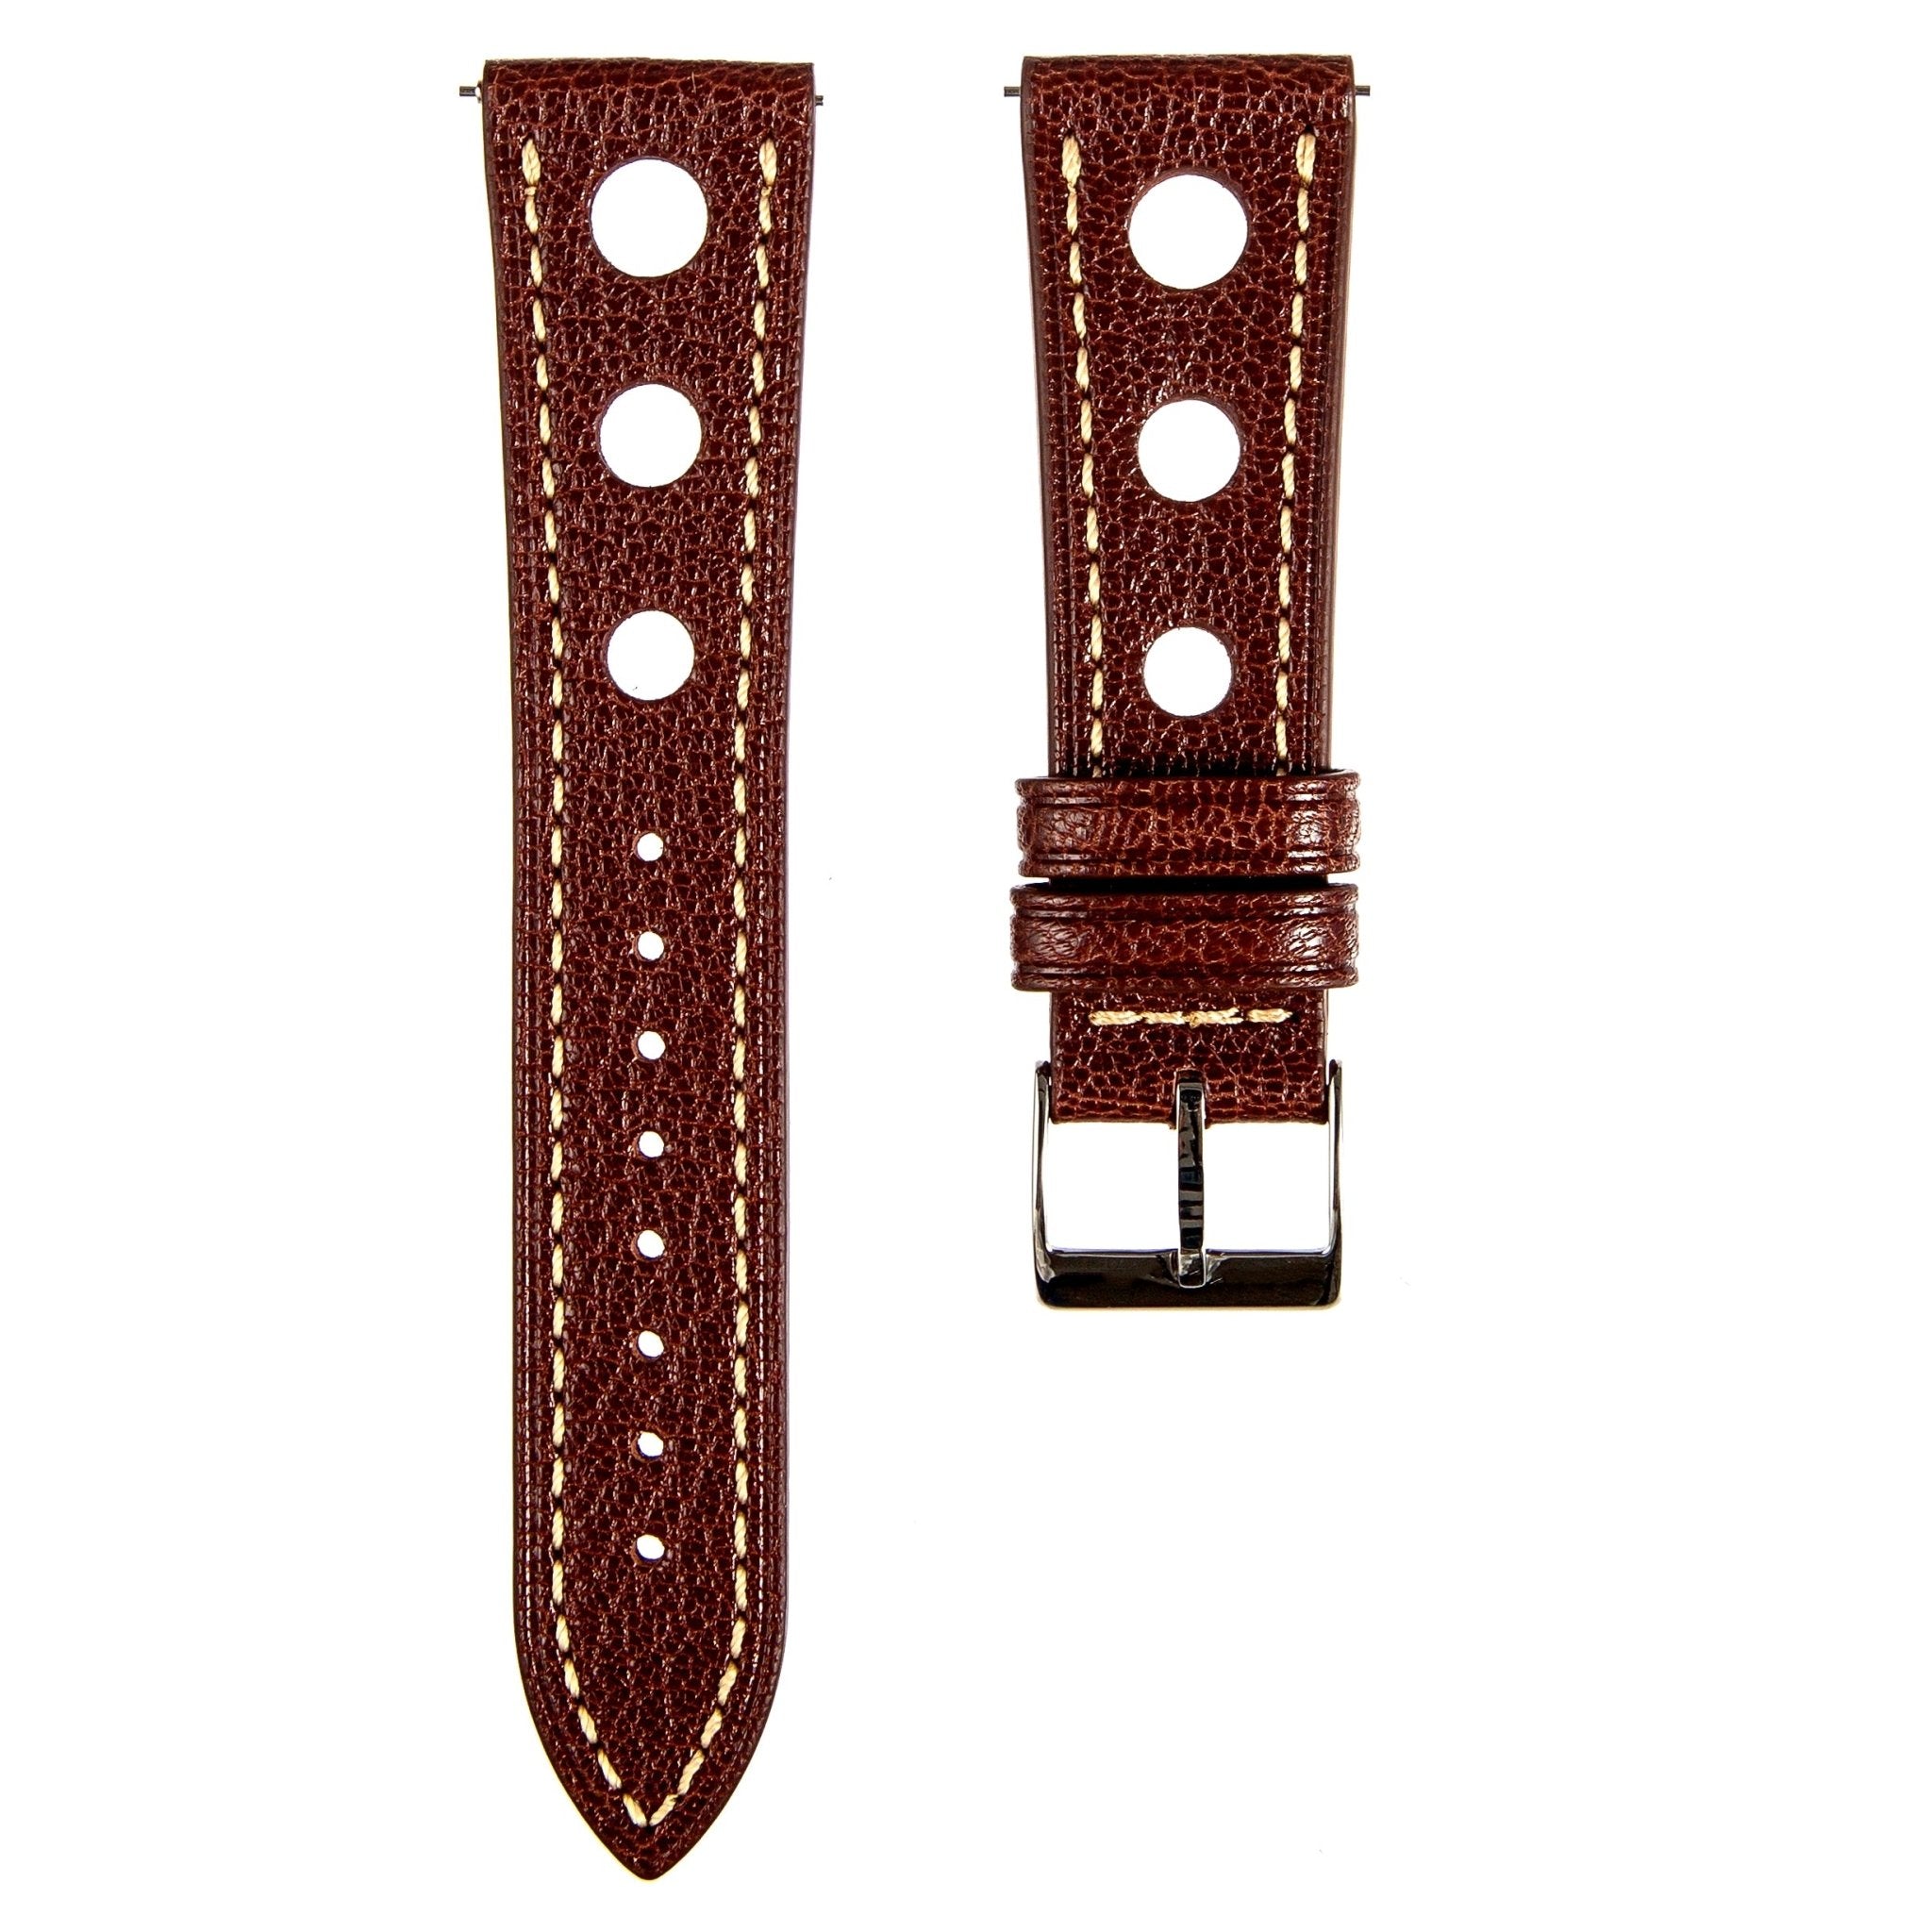 Sully Chevre Rally Leather Strap - Quick-Release - Chocolate (2429) -StrapSeeker